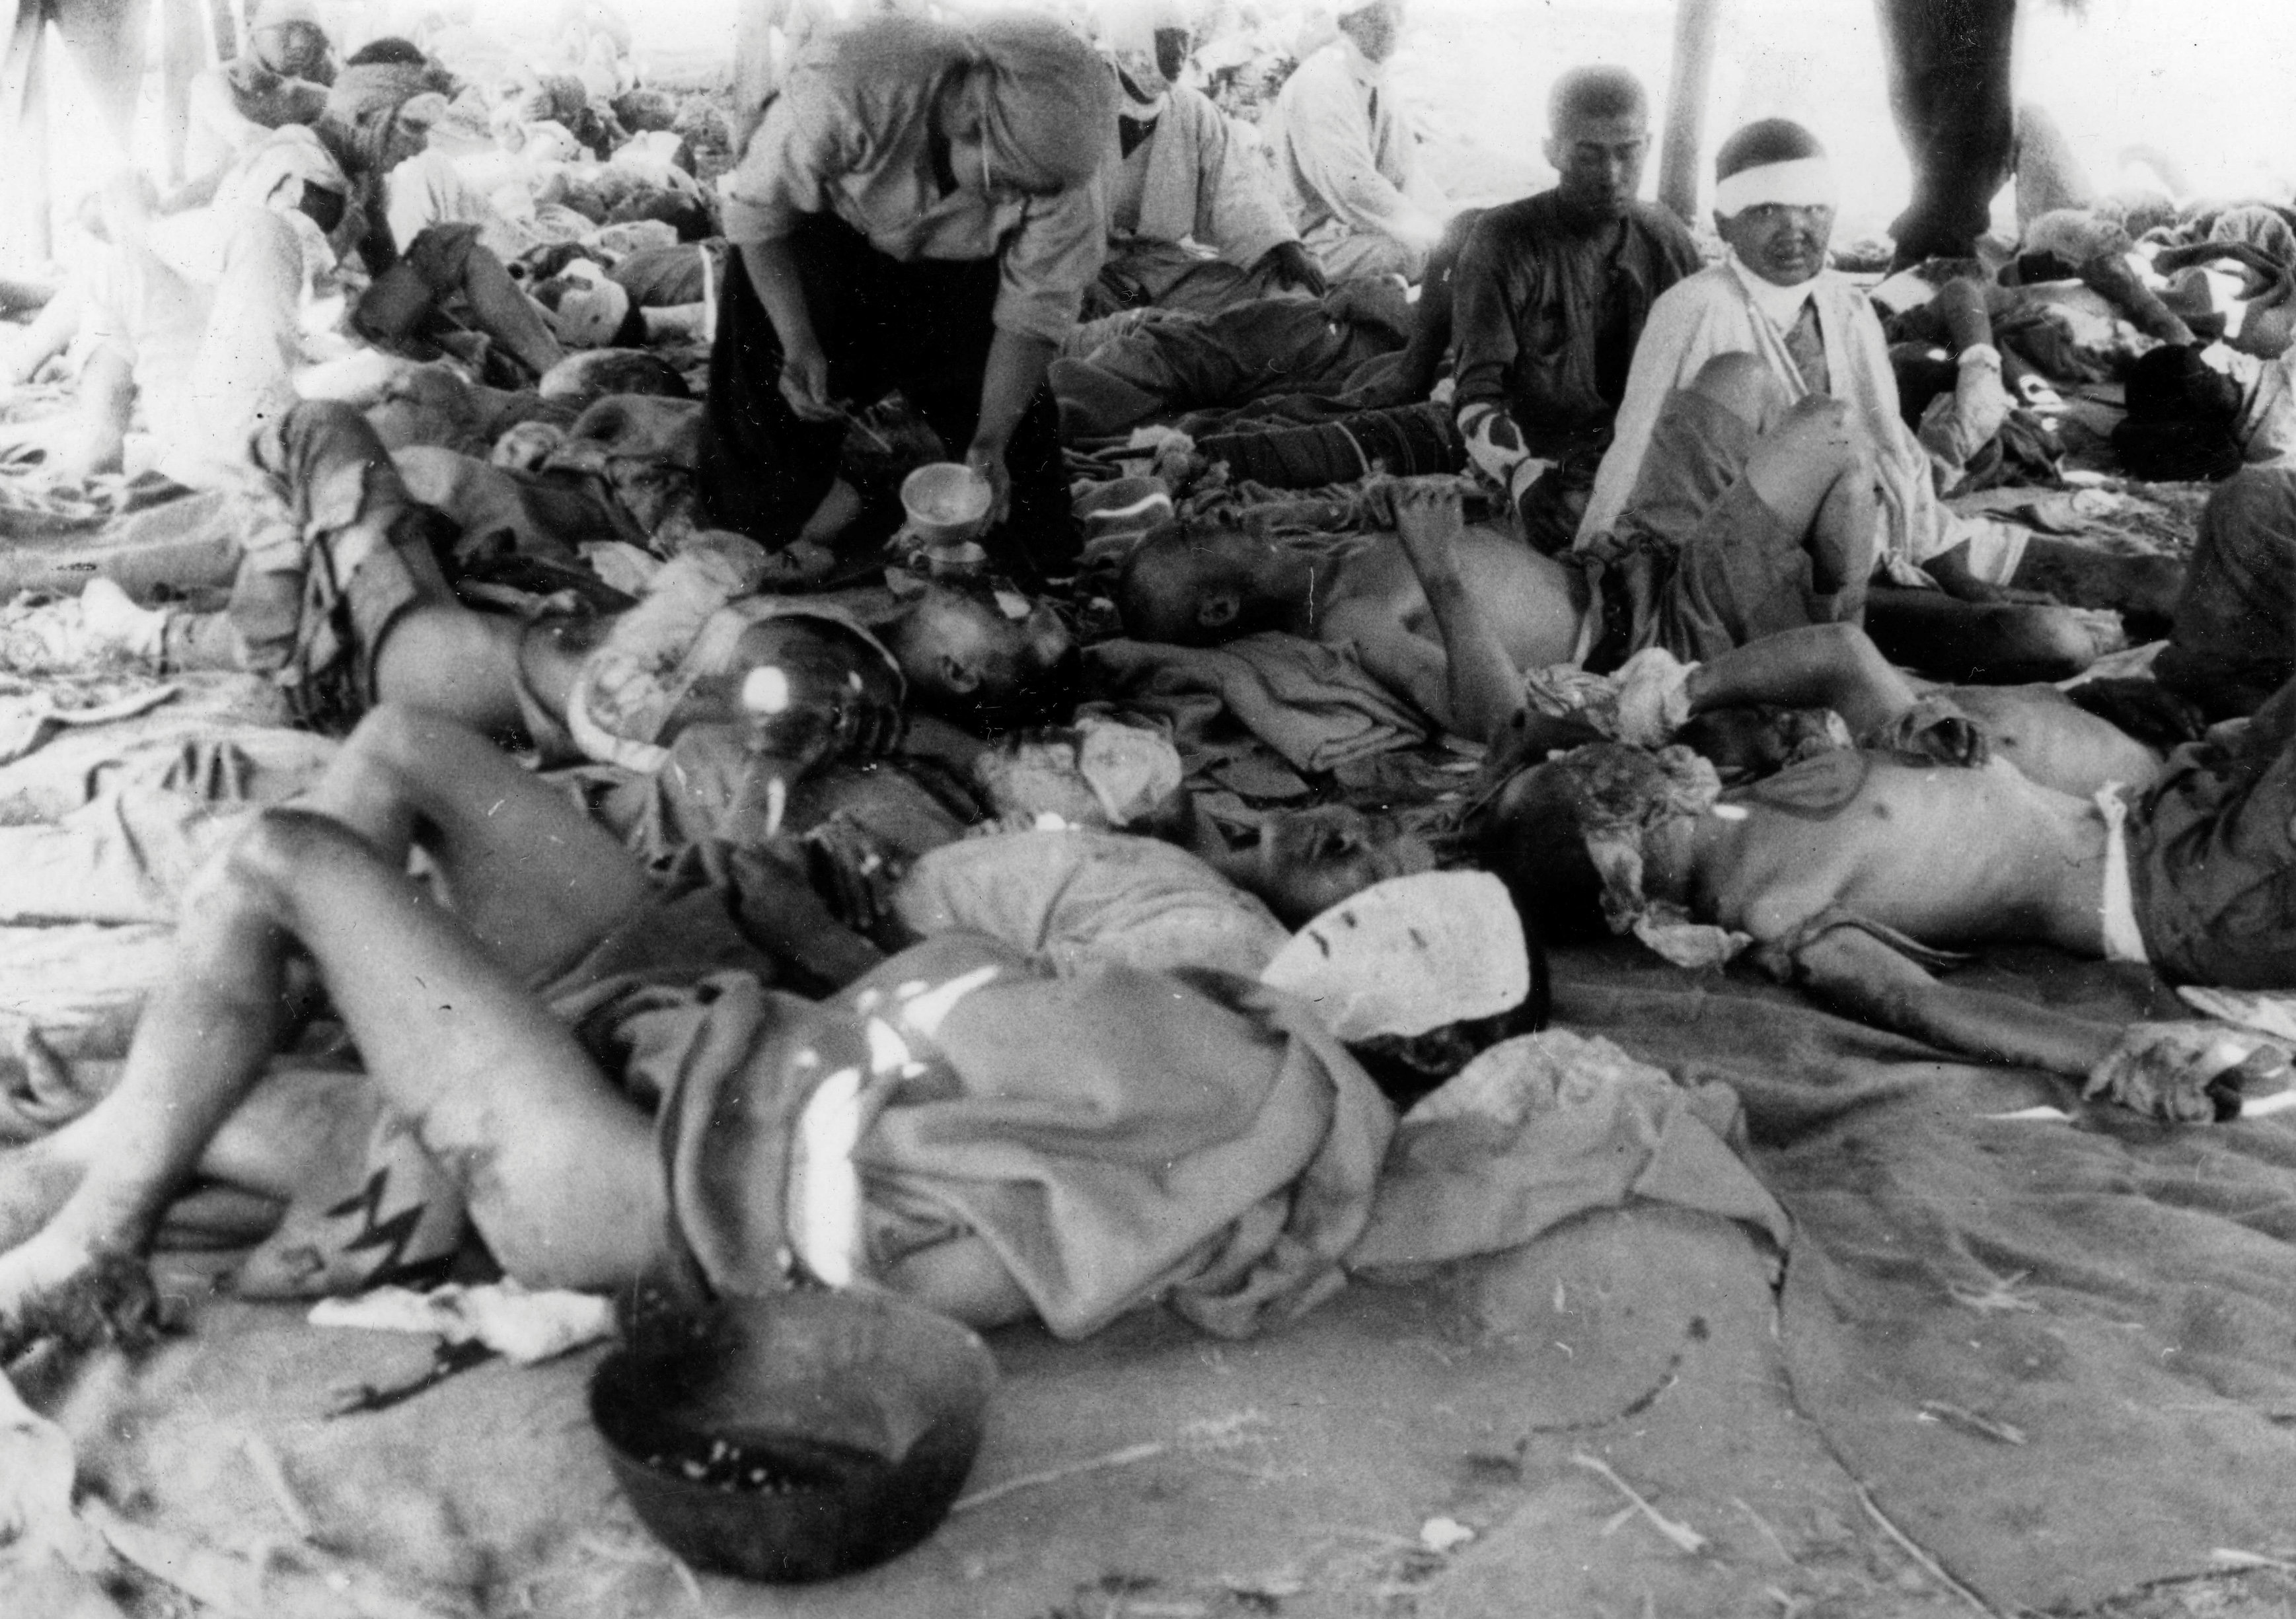  In a photo taken by Yotsugi Kawahara on Aug. 9, 1945, victims of the Aug. 6 atomic bombing seek treatment at an emergency relief station next to the Otagawa

